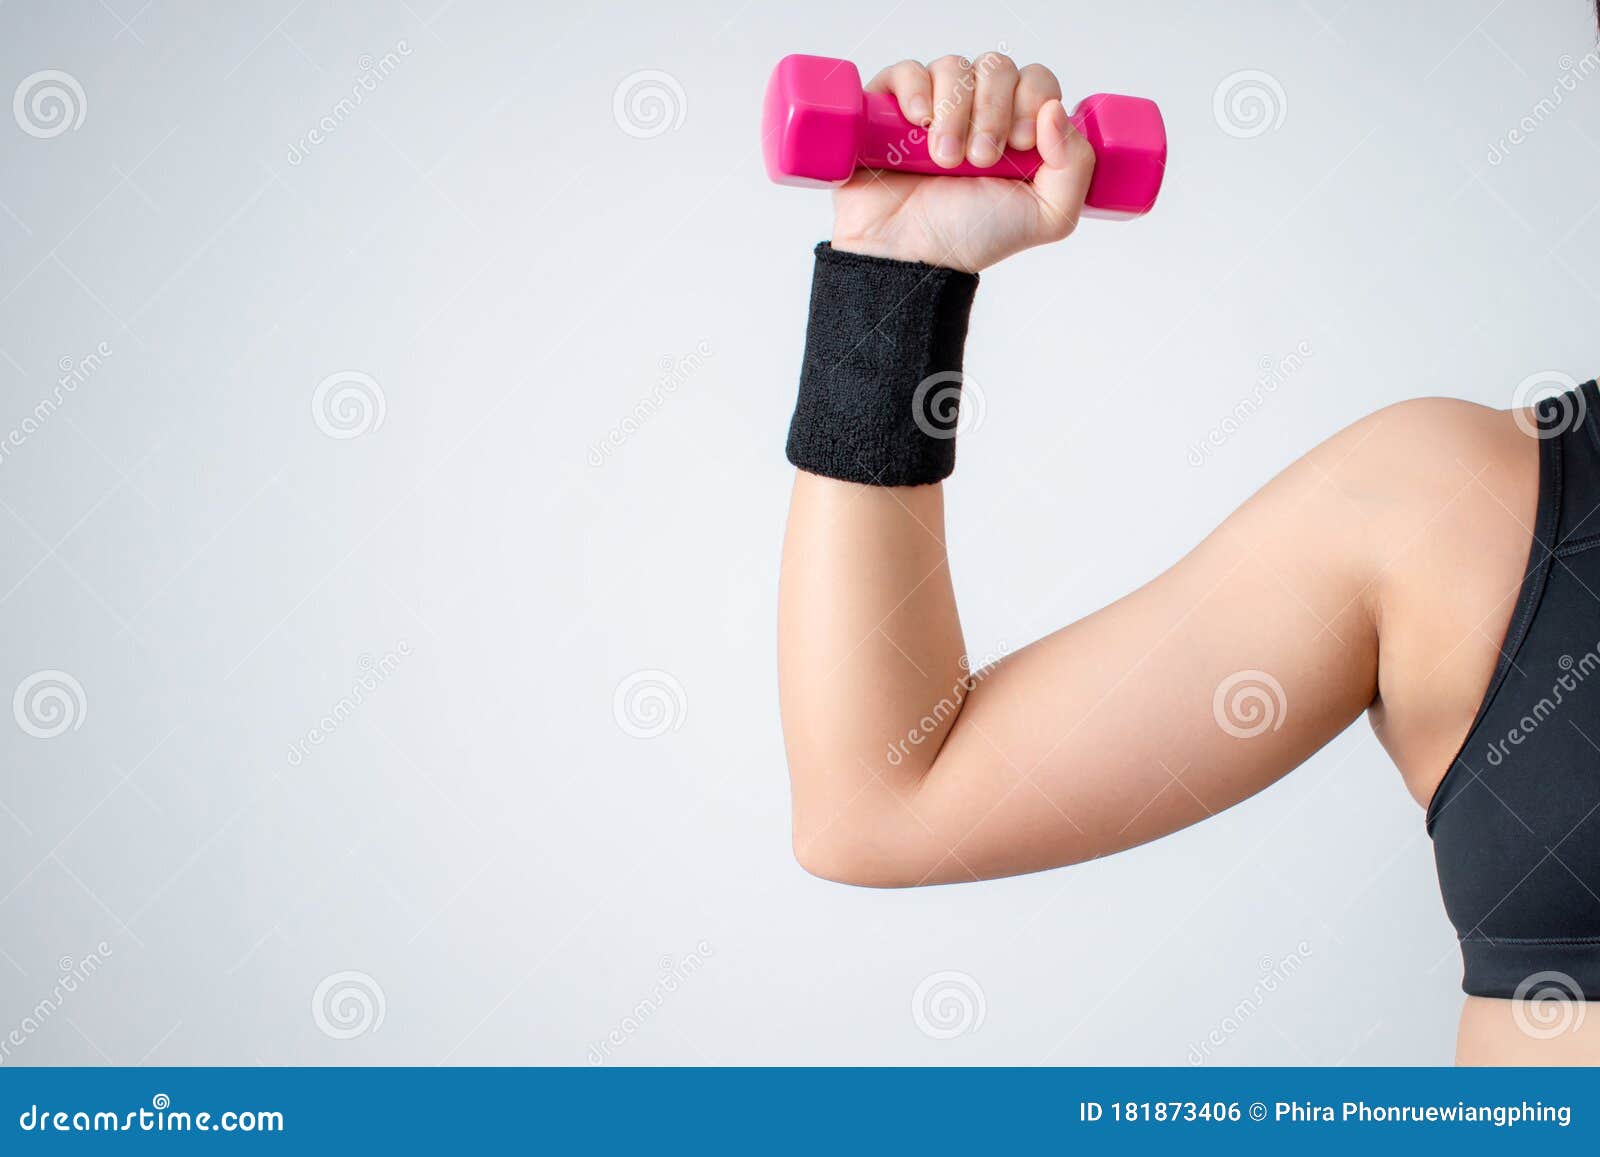 Women Wearing Black Exercise Clothes and Lifting Dumbbells To Train Arm  Muscles at Home. Concepts of Exercise and Muscle Training Stock Photo -  Image of energy, dumbbells: 181873406